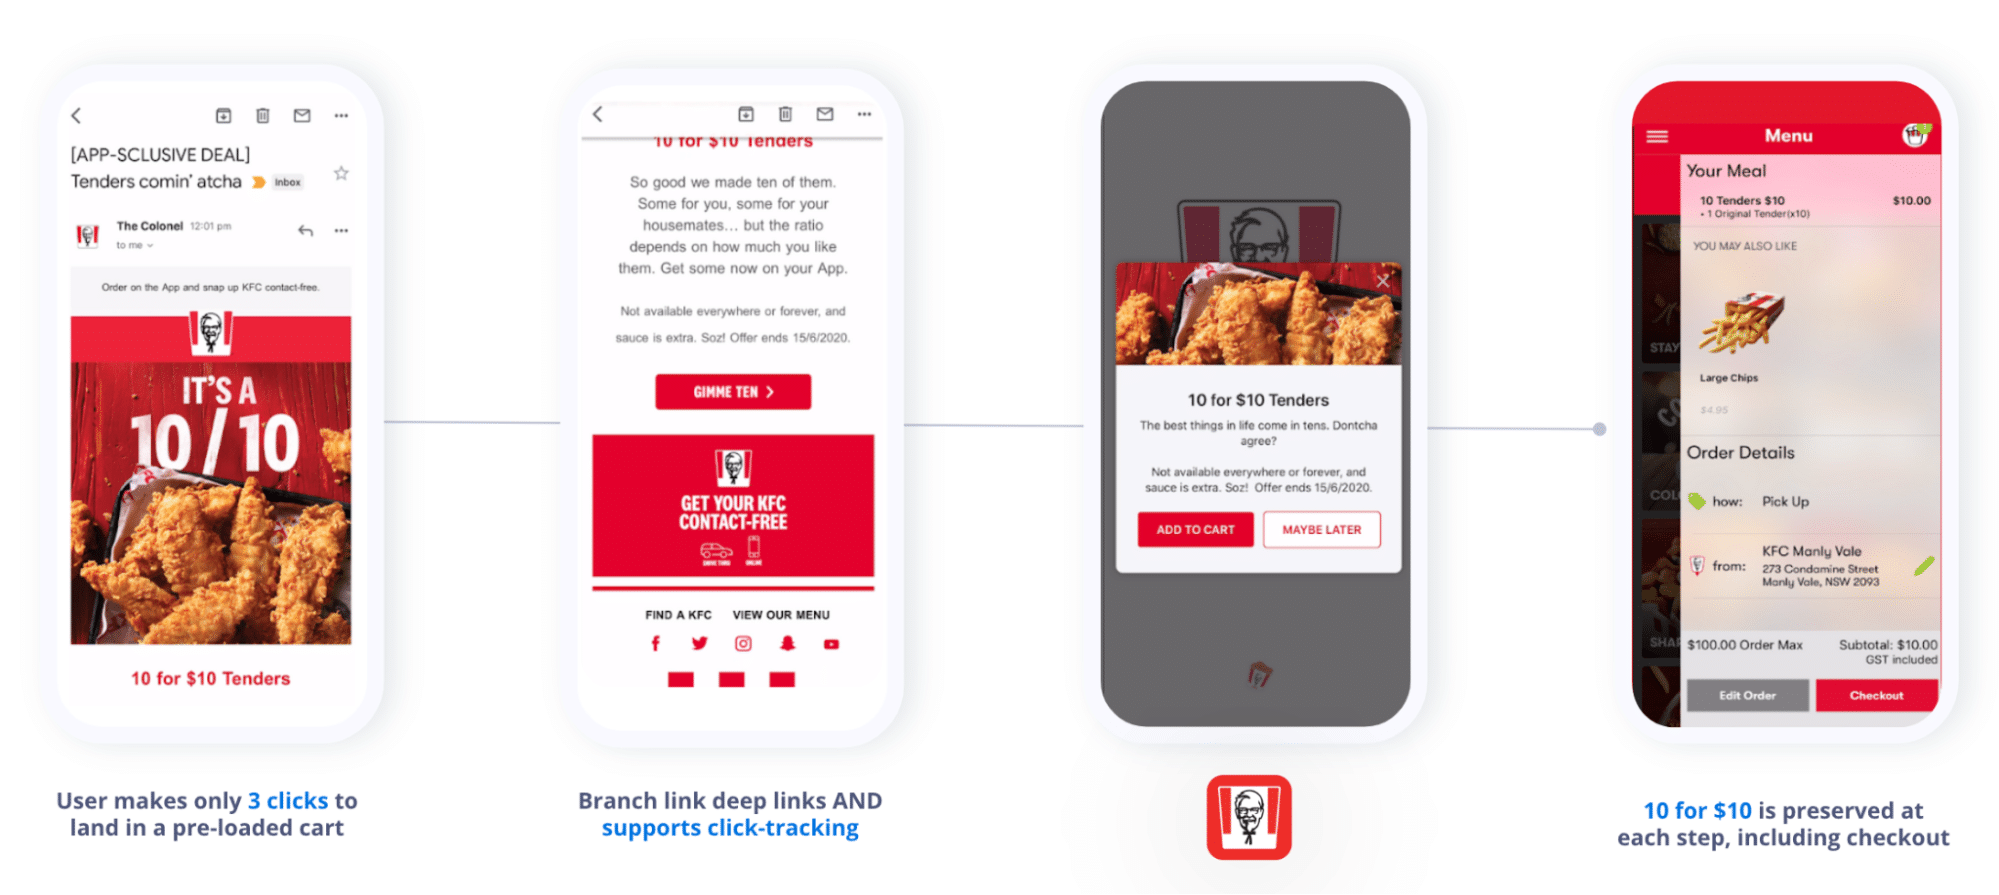 Four iPhones with screenshots showing how KFC puts the app-exclusive deal of 10 tenders for $10 into a user’s cart in just three clicks. The offer is preserved at each step until checkout.